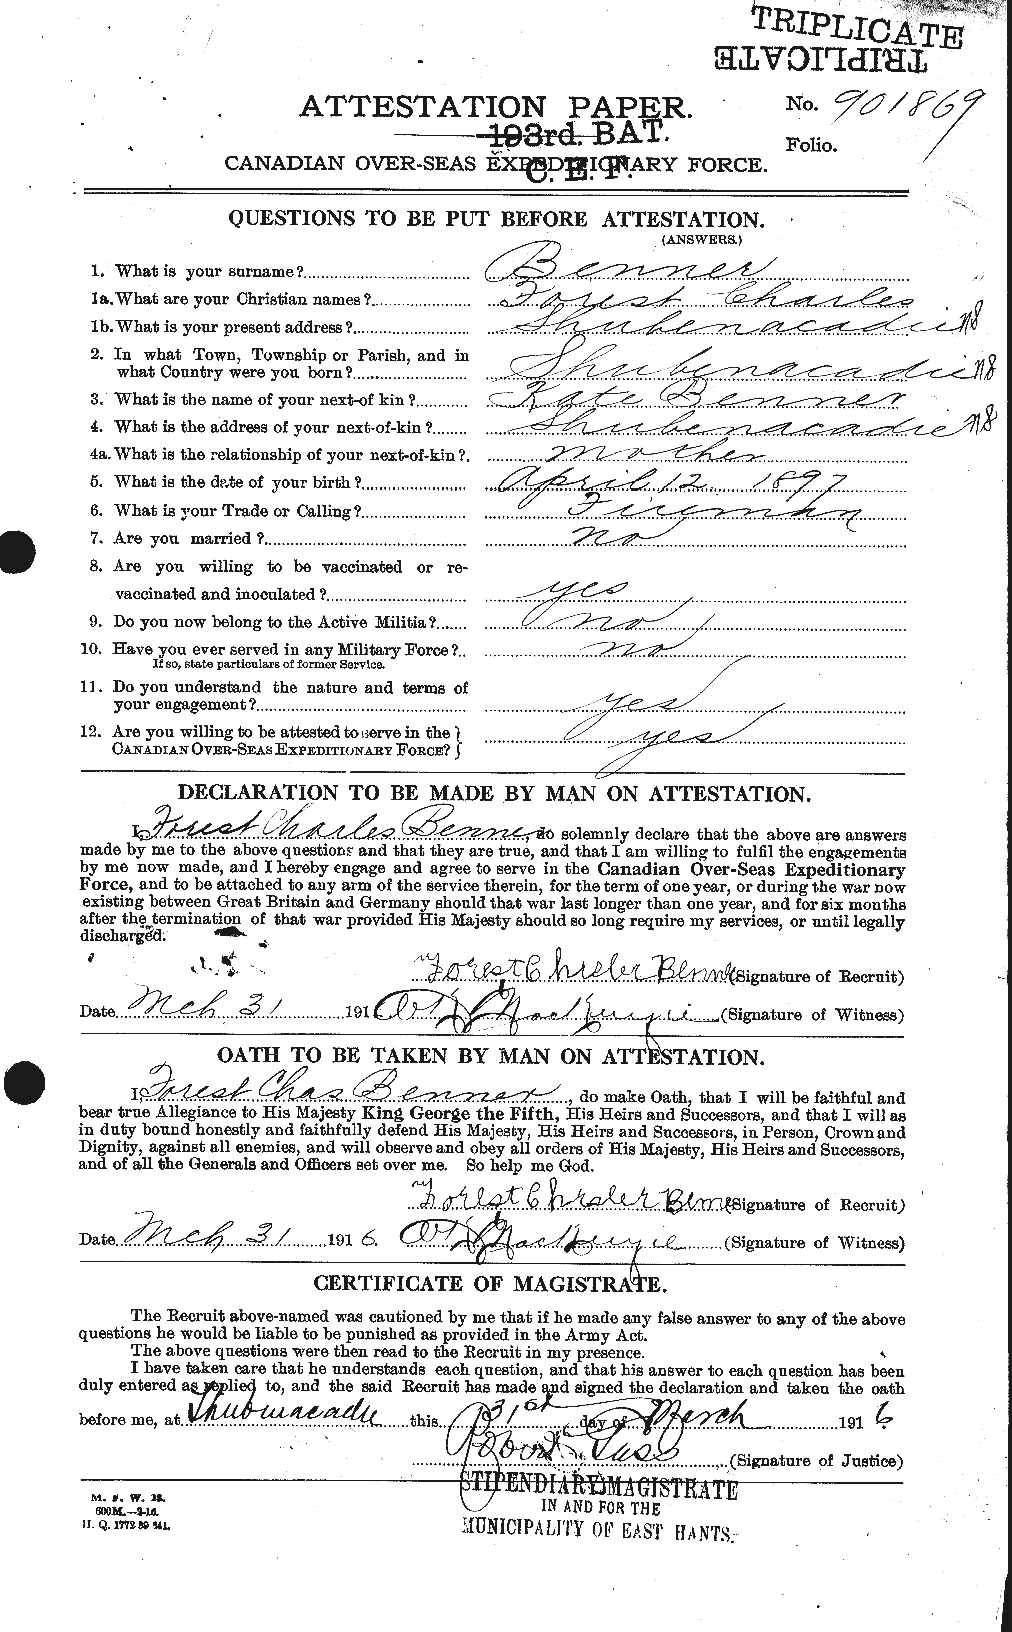 Personnel Records of the First World War - CEF 233238a